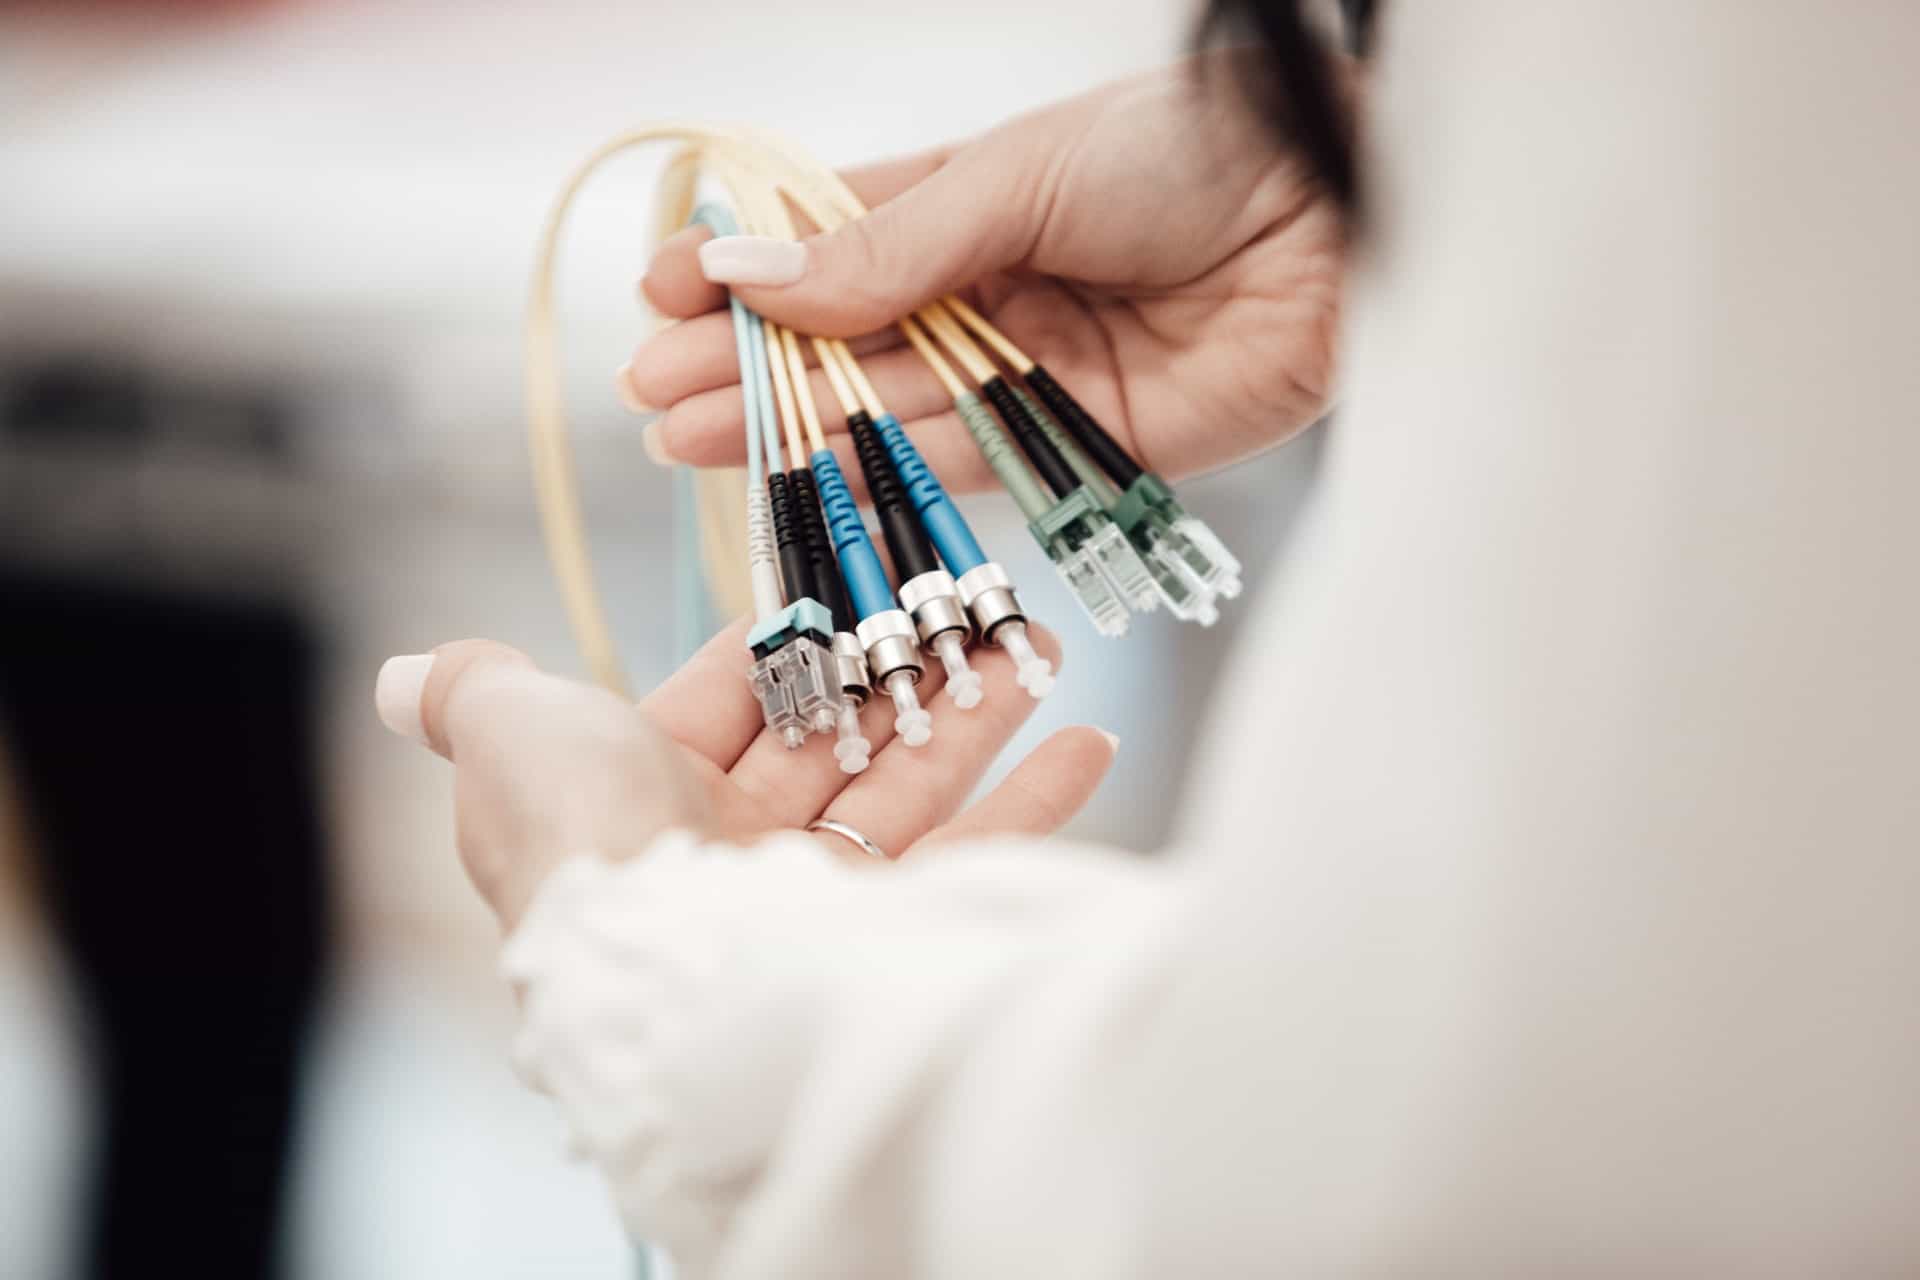 Woman holding the ends of several thin fiber optic cables